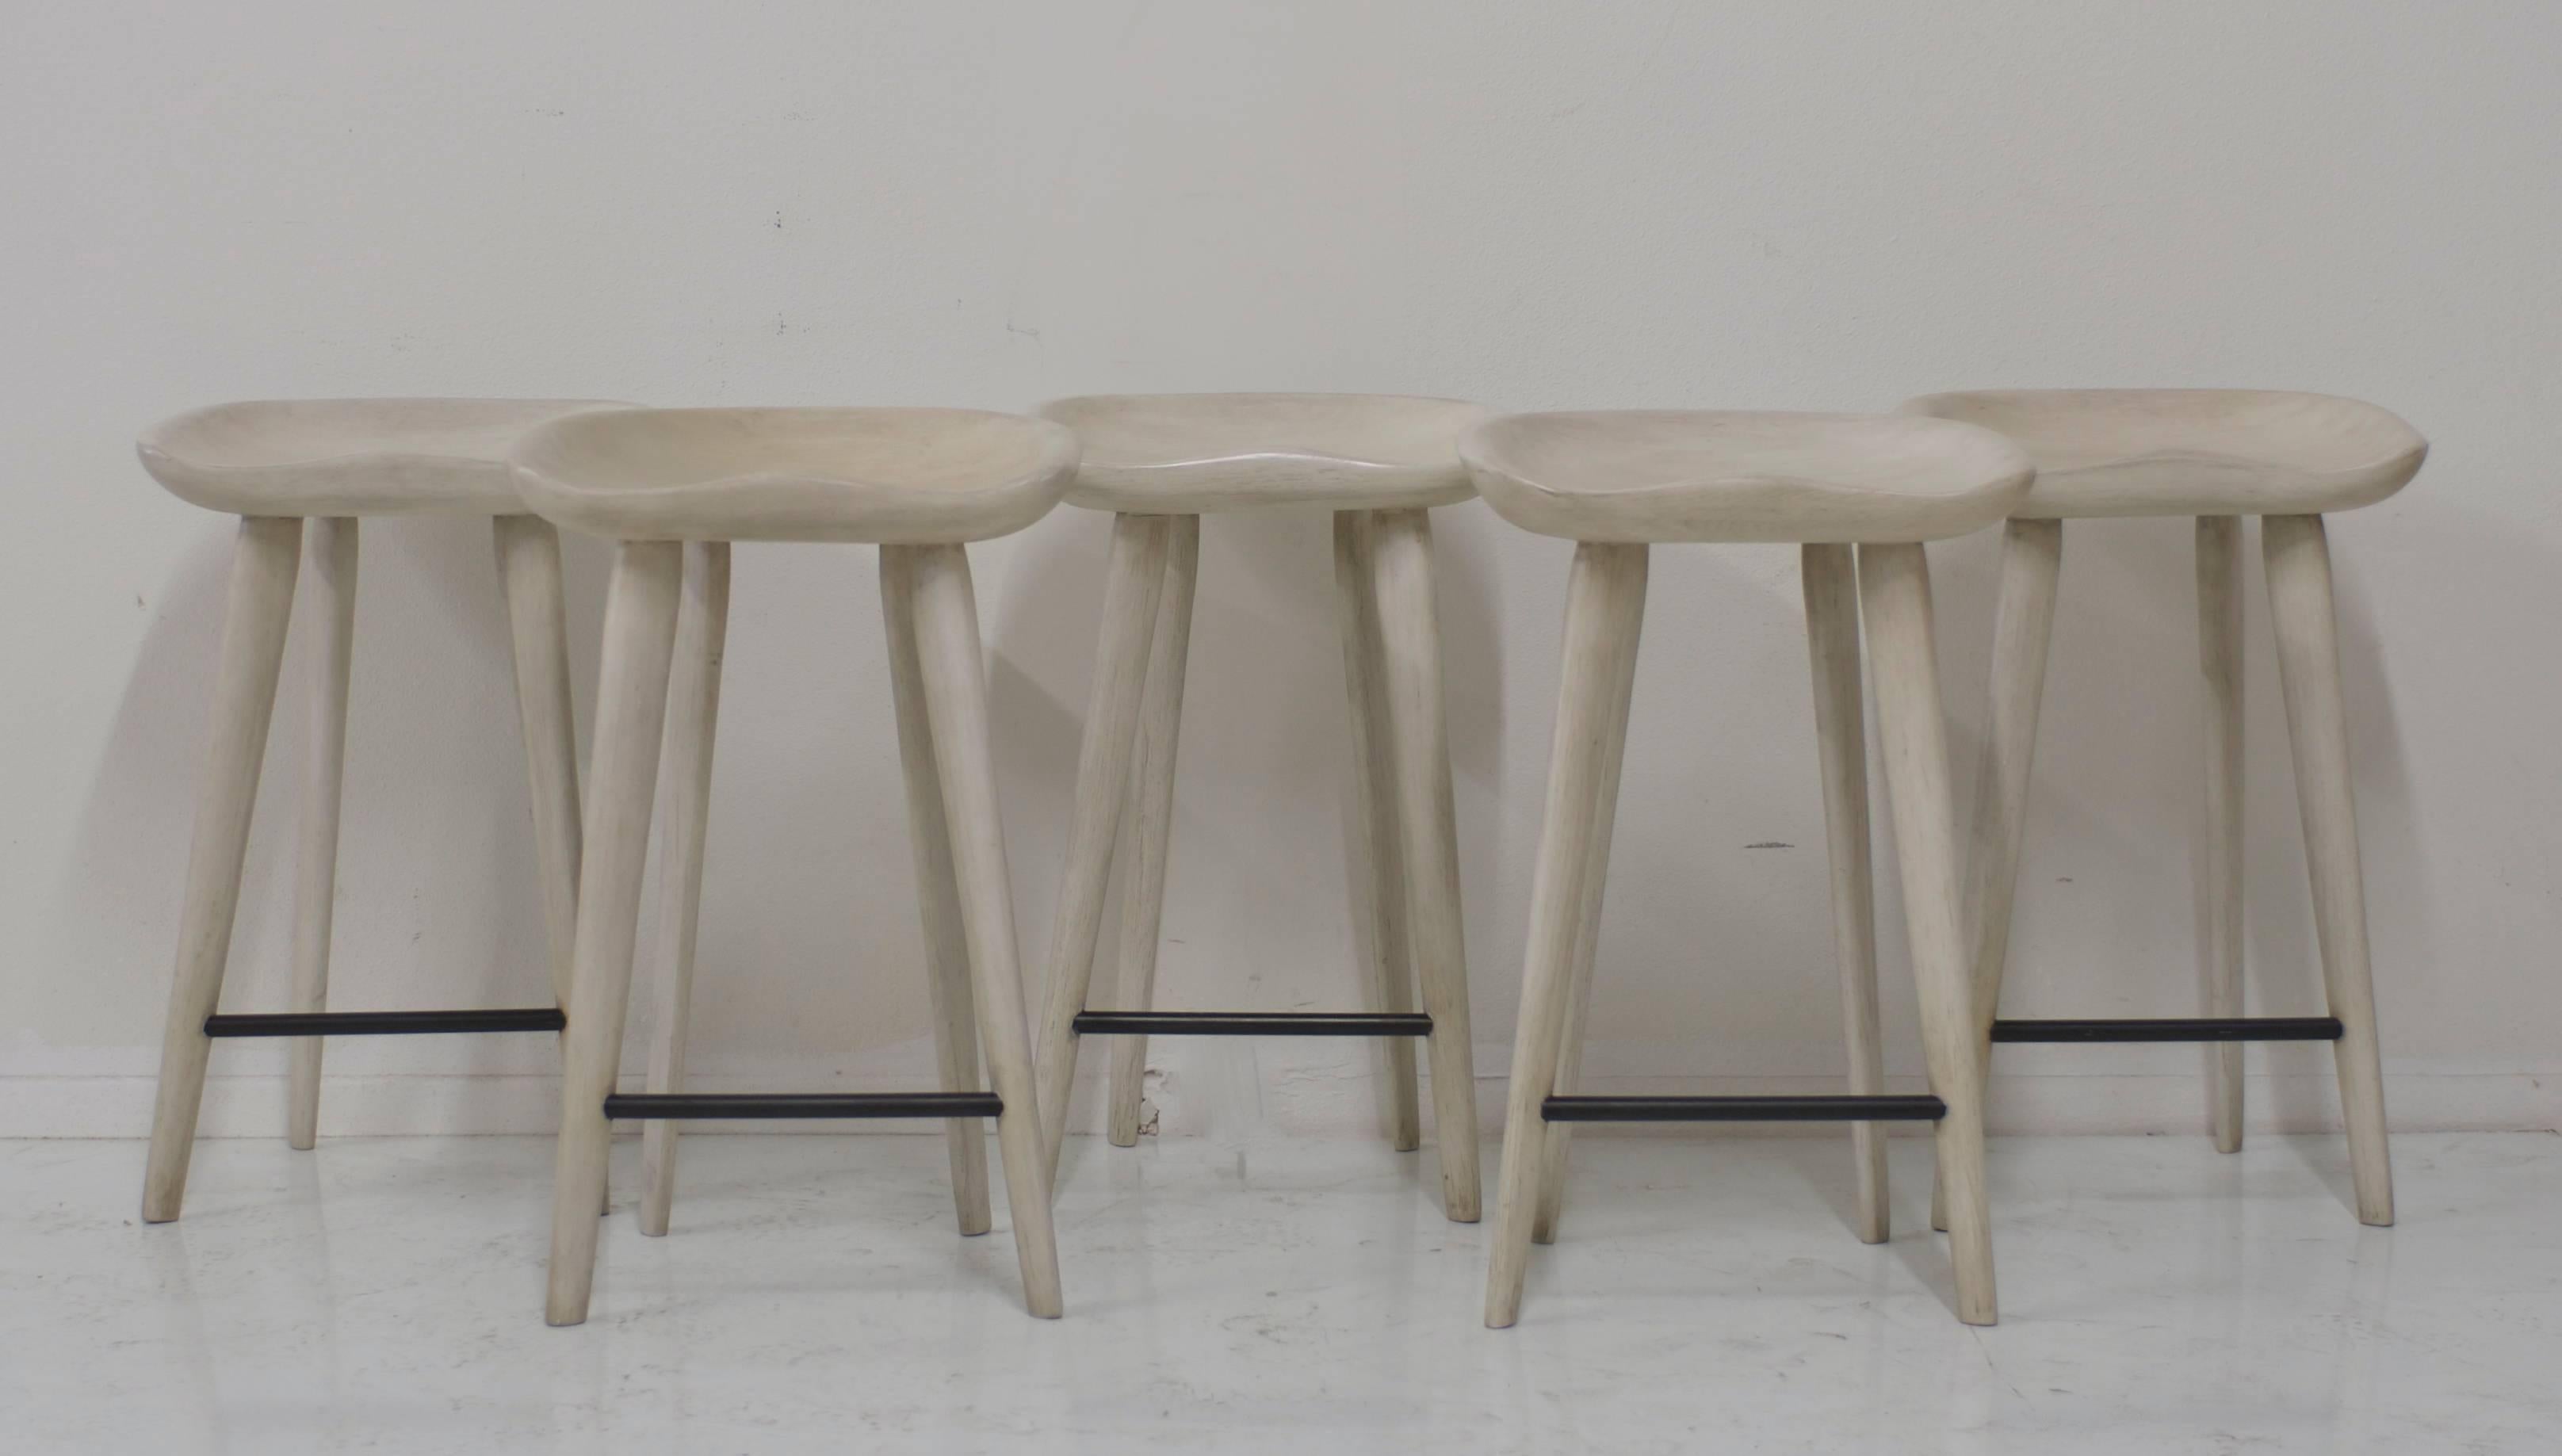 A set of five bar stools that have a customized finish that has a mix of cream and layers of grey and beige colors which blend together to look like driftwood. The footrests are a charcoal black.
There is some natural variation in the colors that